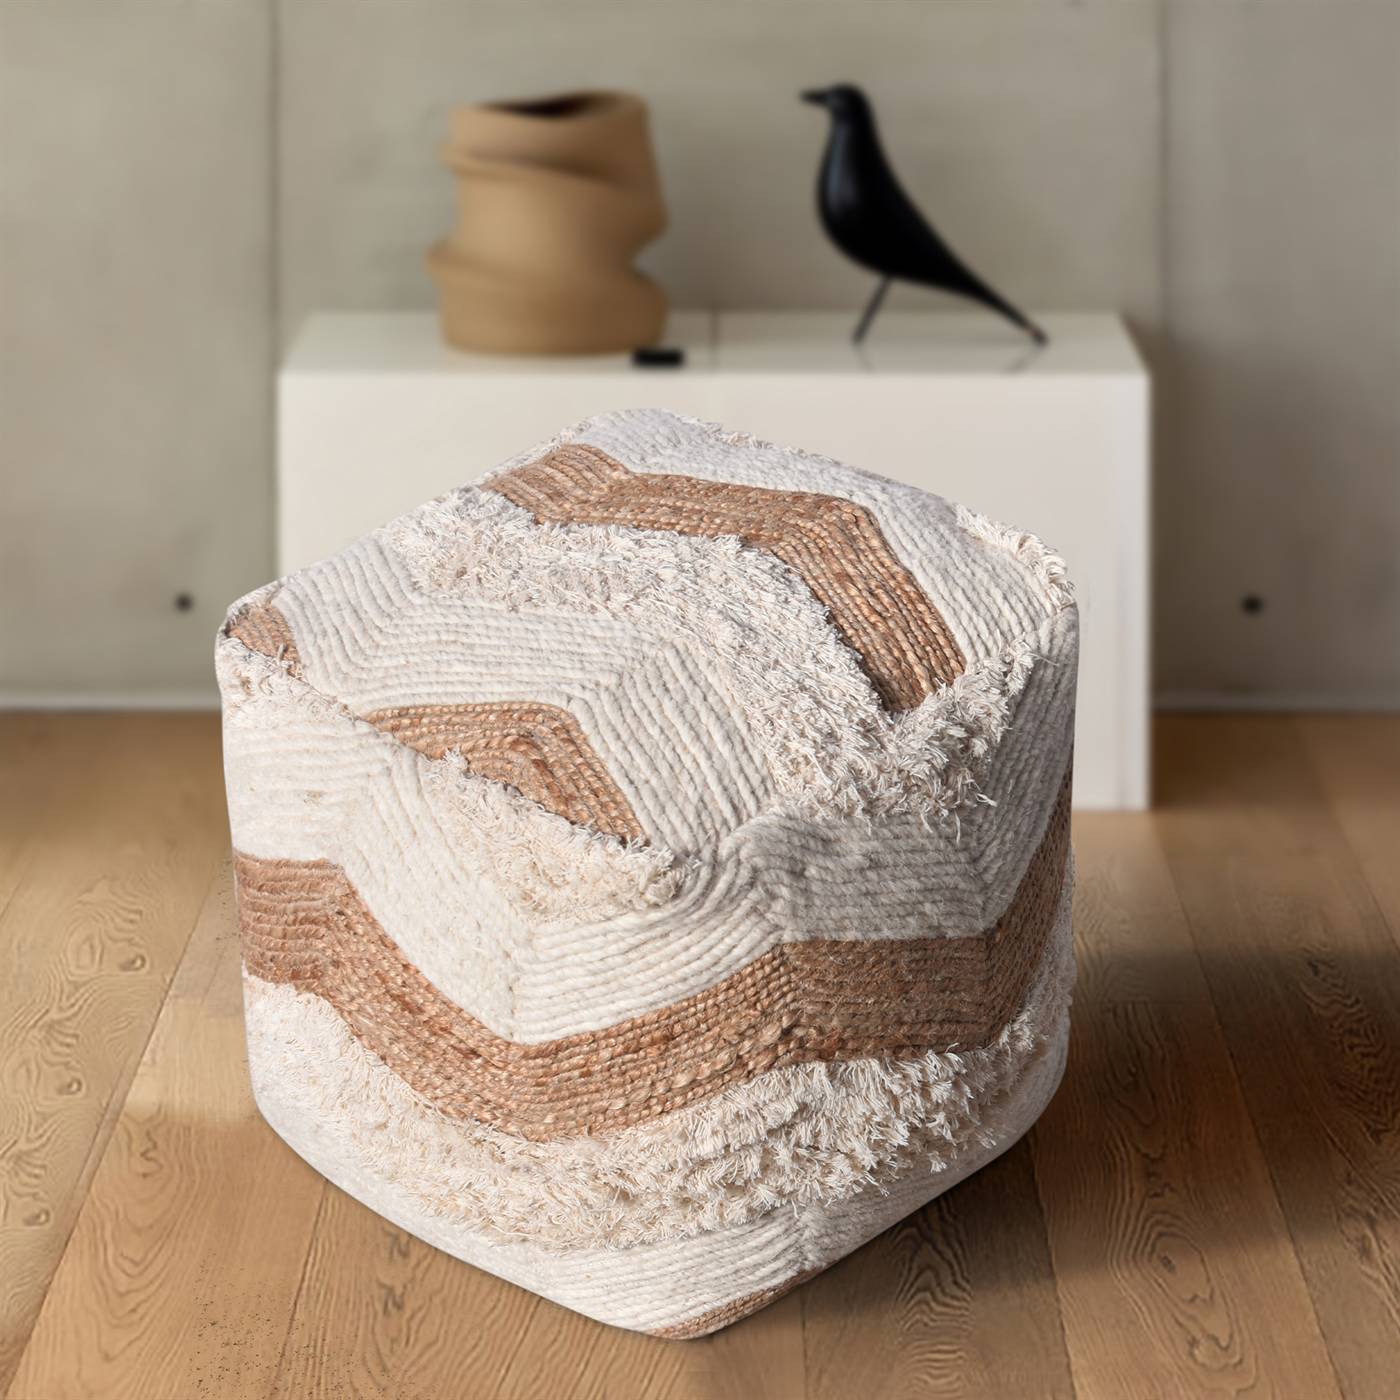 Olaine Pouf, 40x40x40 cm, Natural White, Natural, Wool, Jute, Cotton Salvage, Hand Made, Hm Stitching, Flat Weave